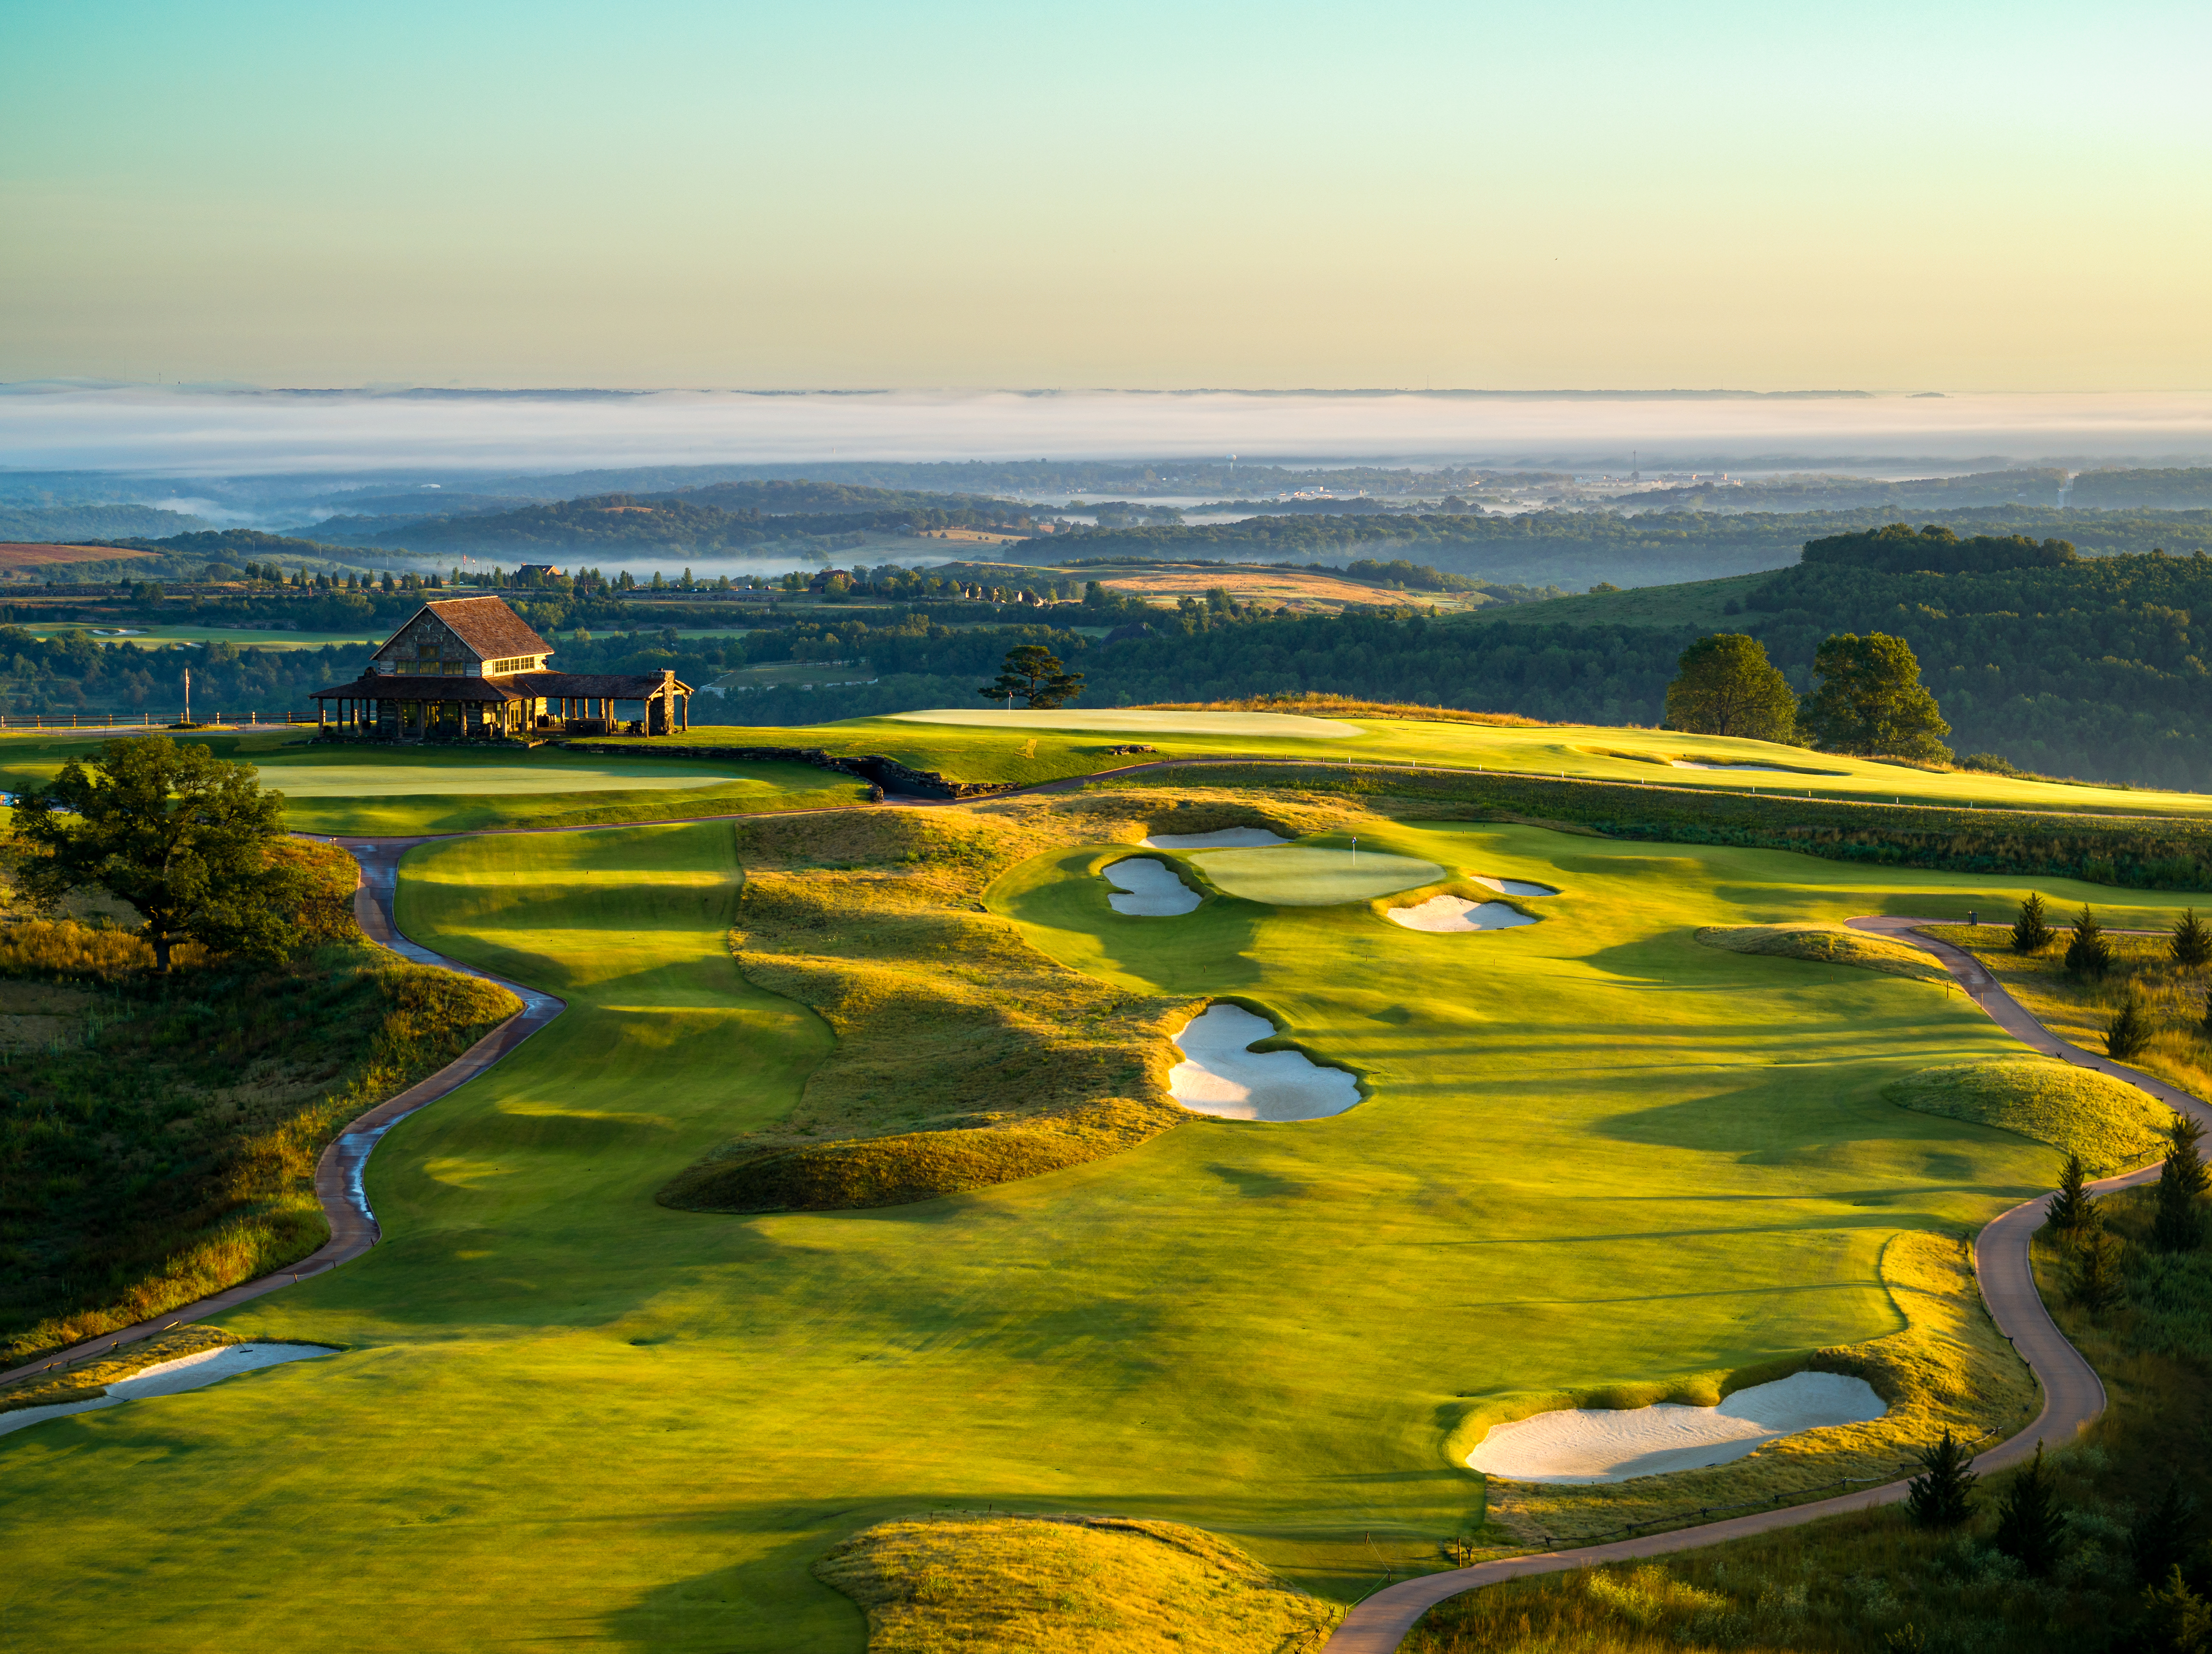 Top 15 Golf And Country Clubs In The World Honored With Platinum Status